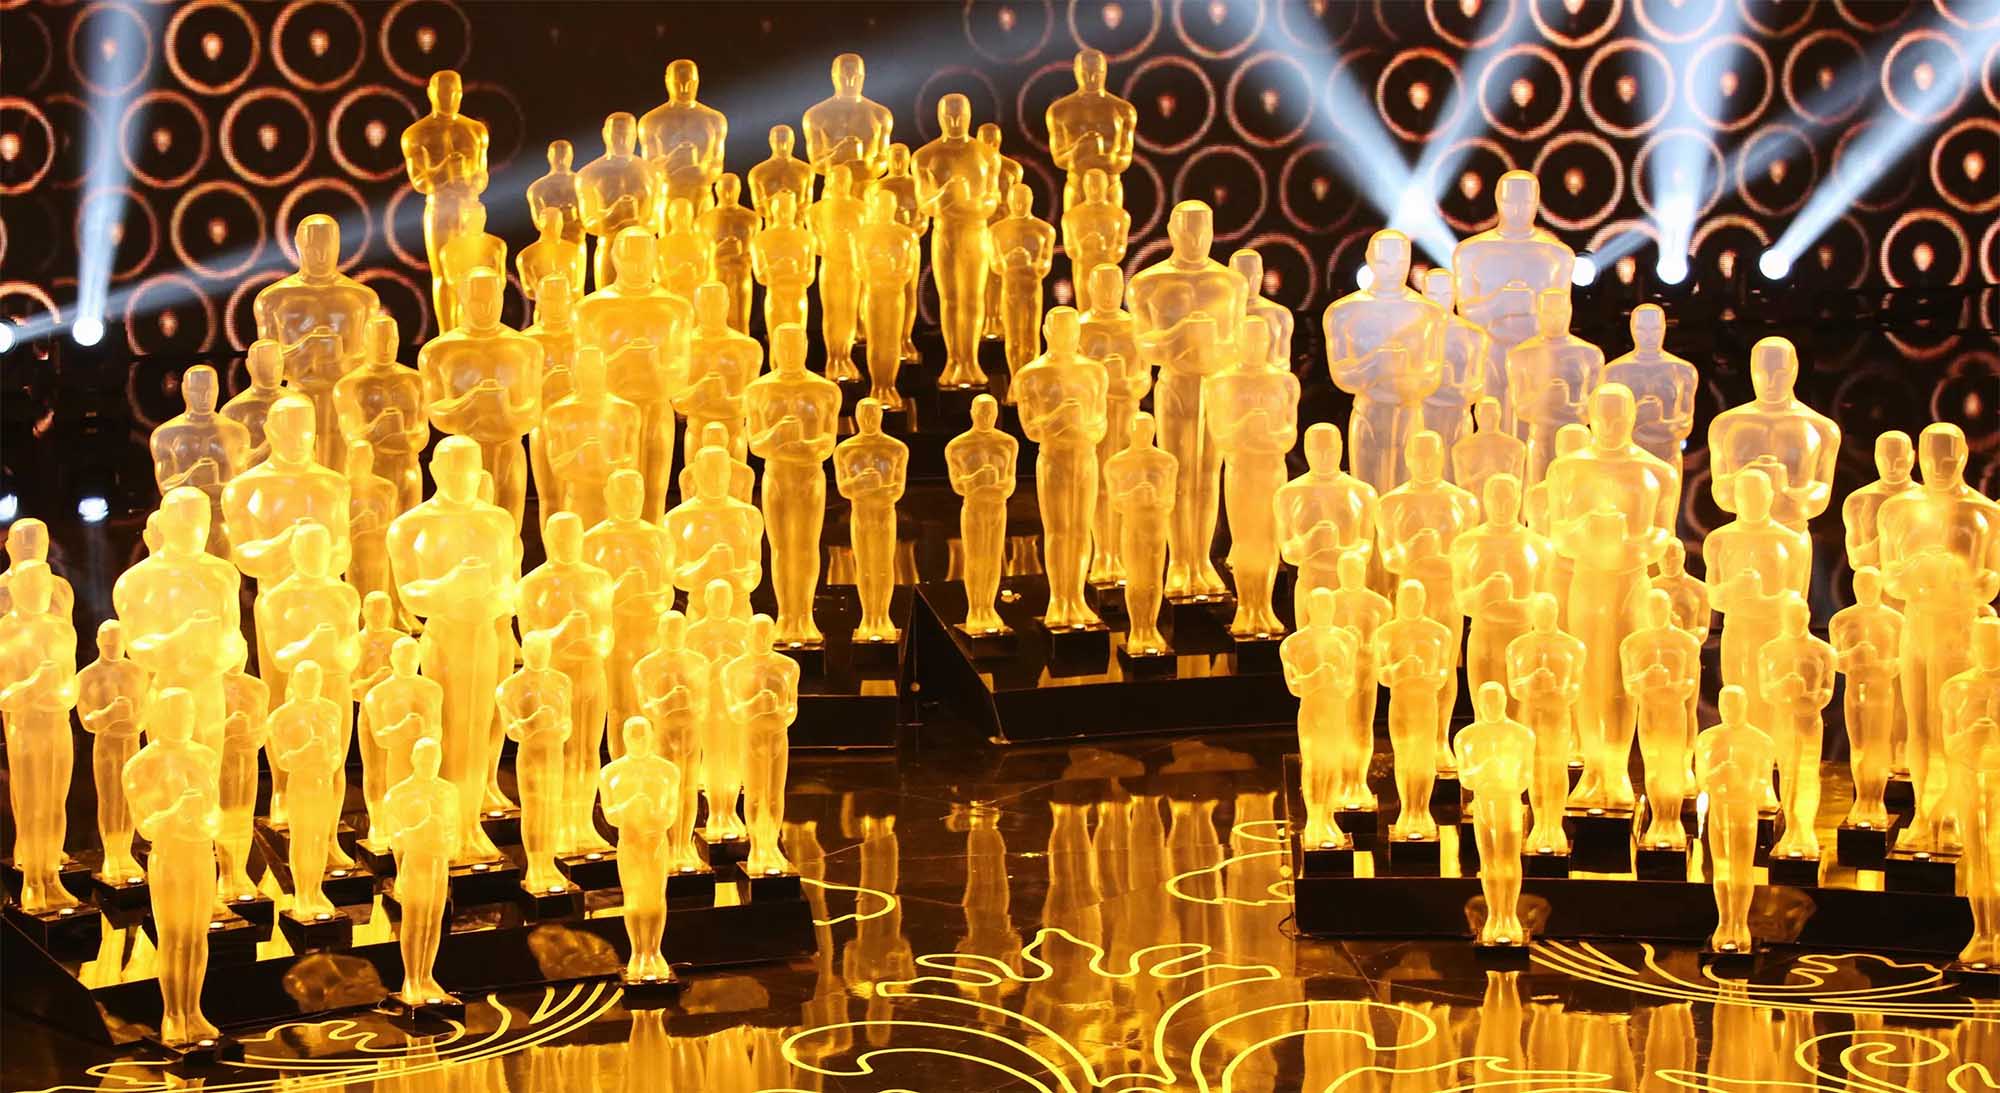 We know, we know – the last thing you want to spend your Thursday doing is thinking about the 2019 Oscars awards. But we’re not here to discuss who’s already in line for a nomination. No, today we’re focusing on this week’s announcement that the Academy has tweaked its rules and pissed off a load of people.